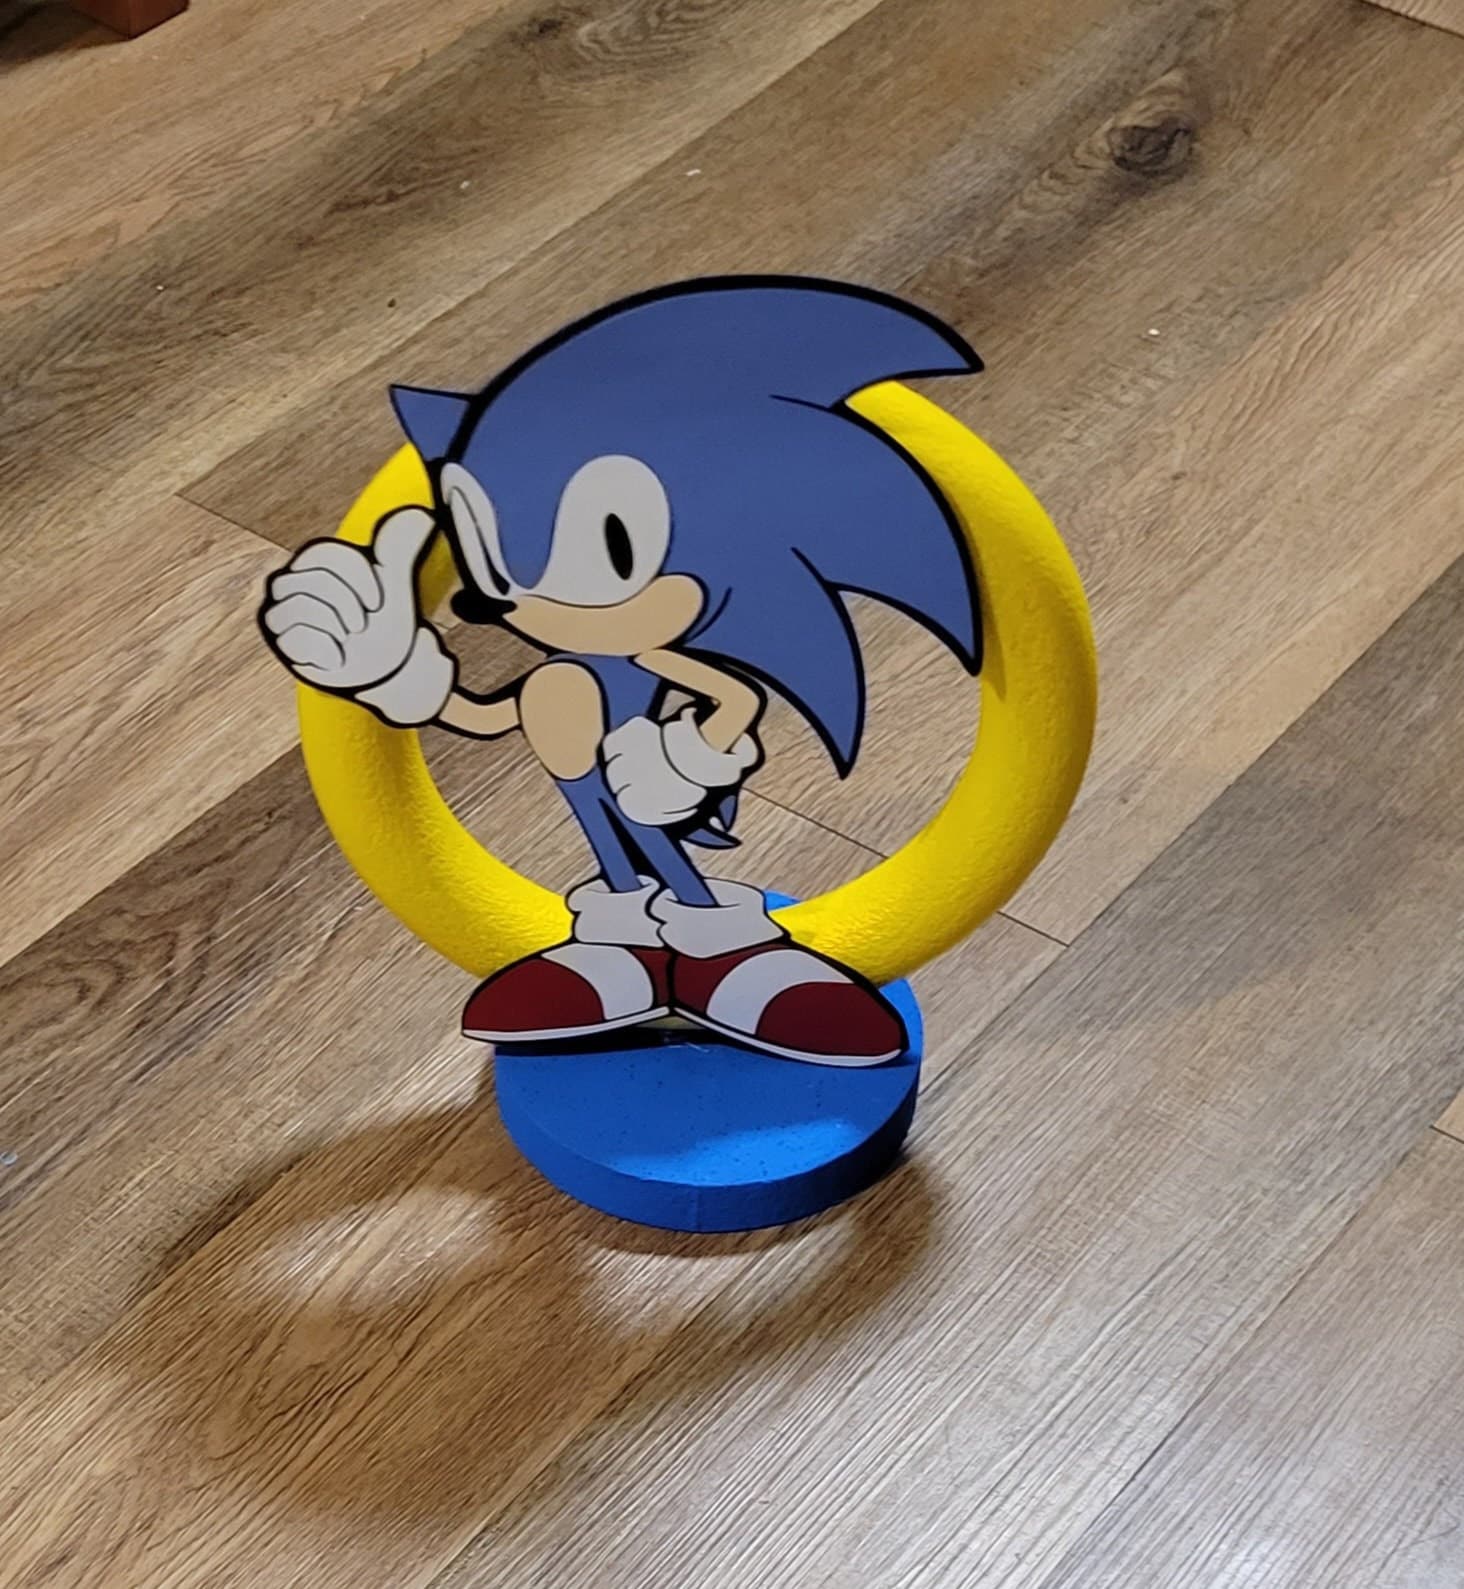 Tails Cardboard Cutout, 3ft - Sonic the Hedgehog